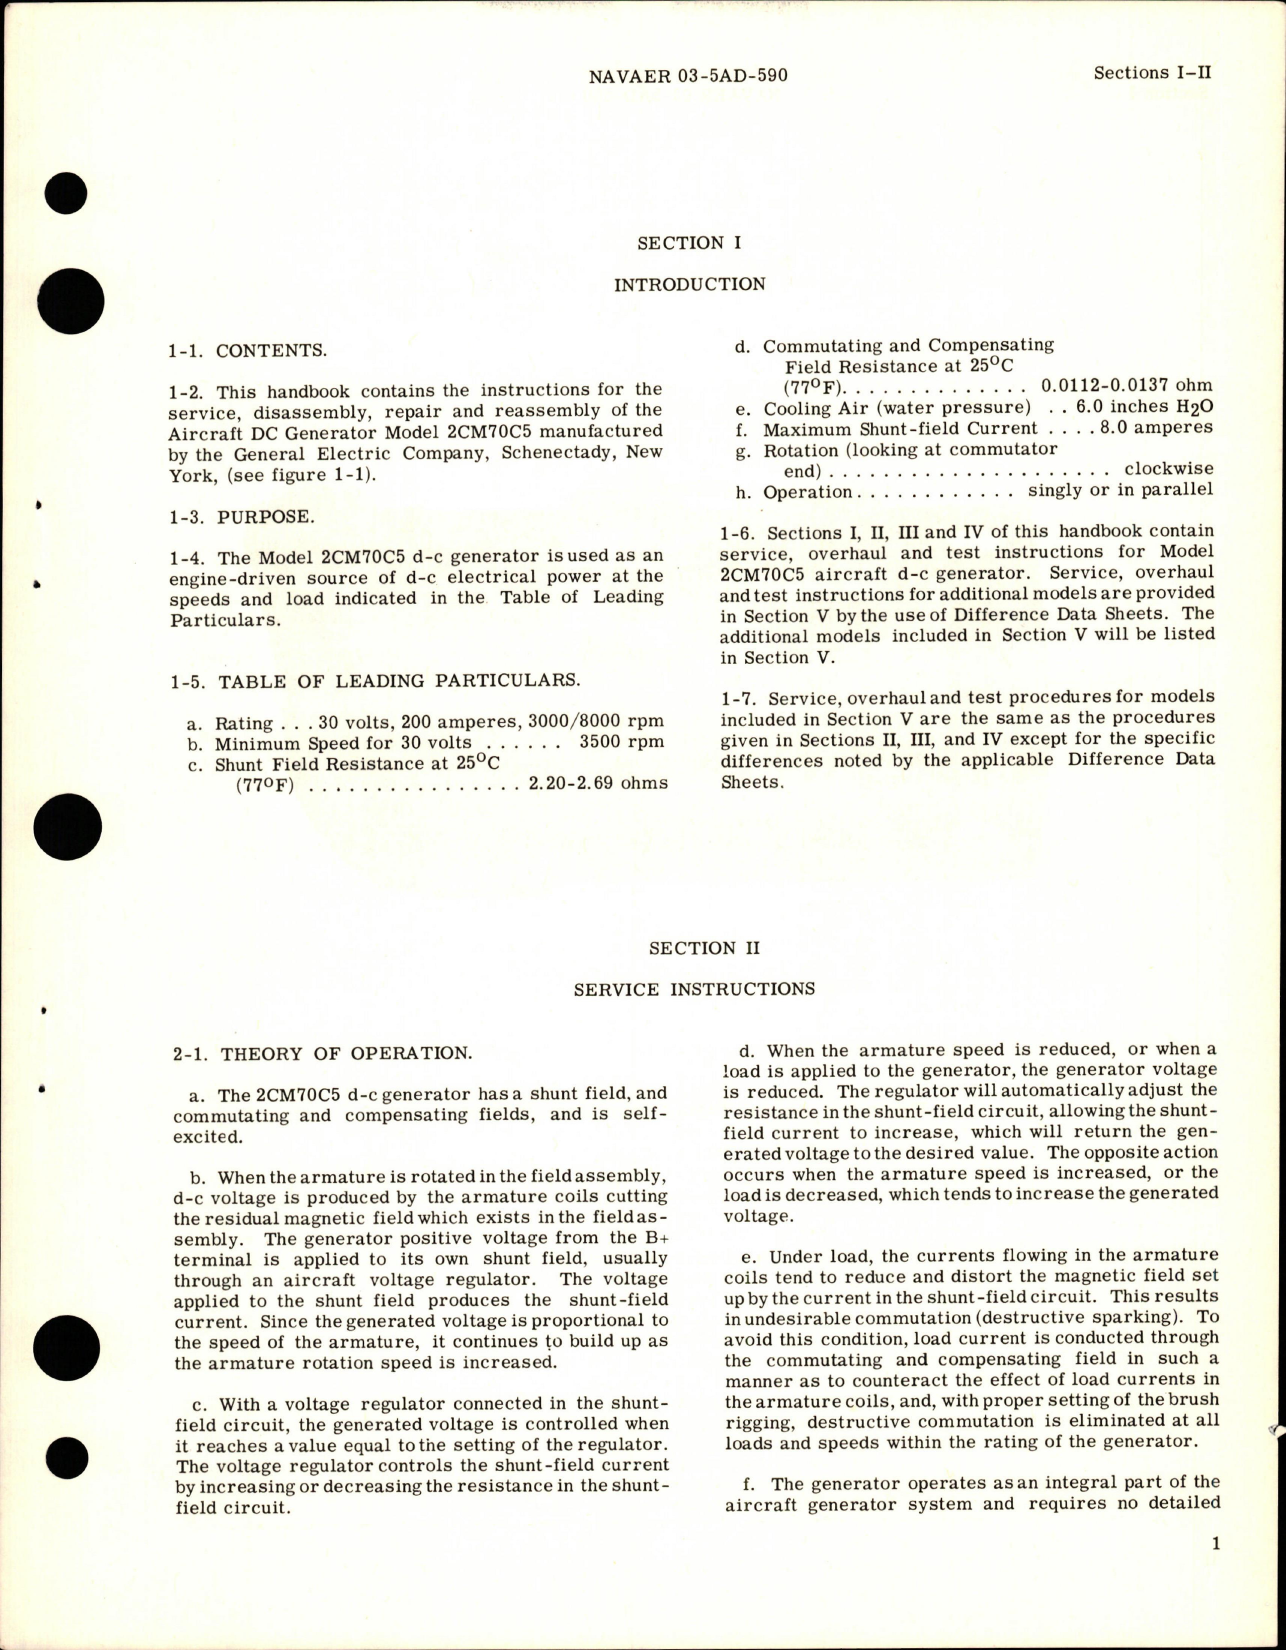 Sample page 5 from AirCorps Library document: Overhaul and Service Instructions for Aircraft DC Generator - Models 2CM70C5 and 2CM70D2 